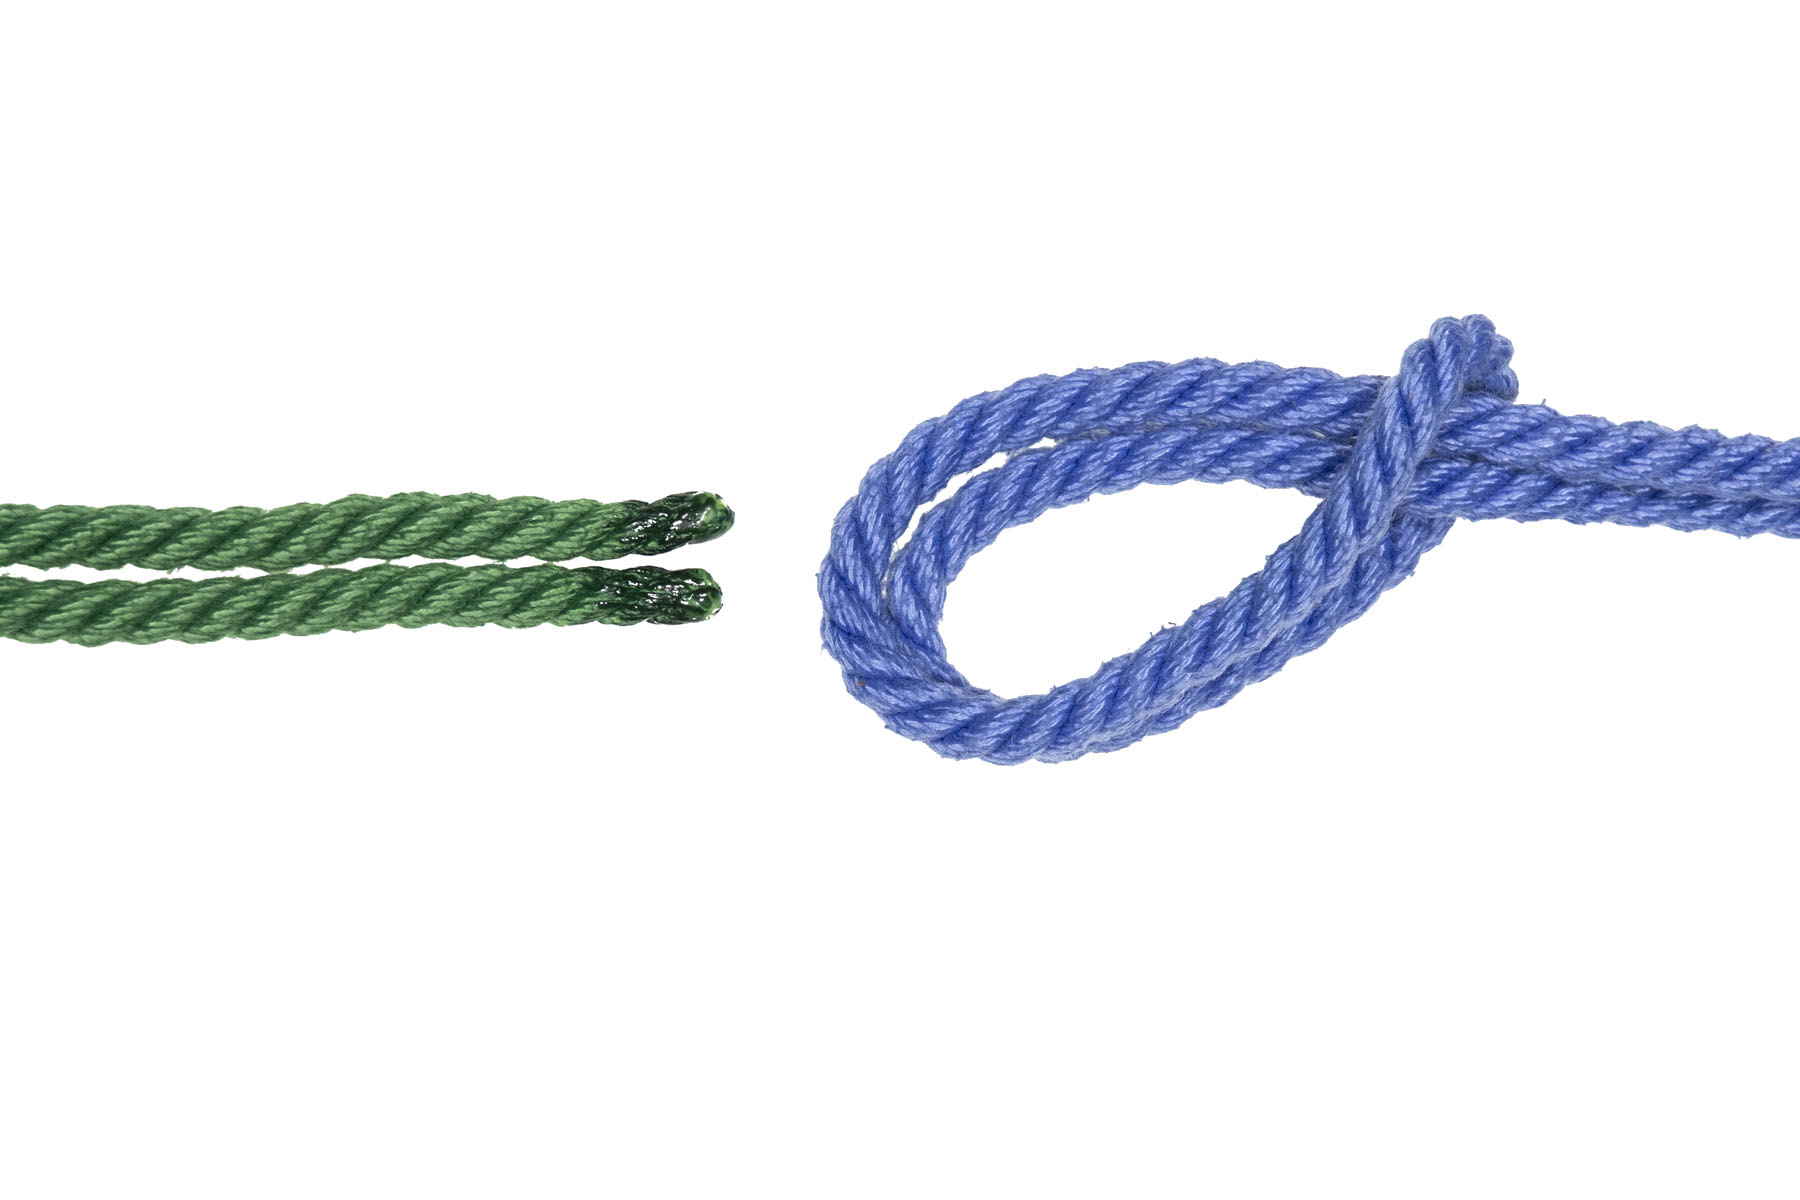 A lark’s head has been made in the blue rope by folding the bight back and pulling some rope through the bight. The final result is a lark’s head, making a loop in the blue rope.